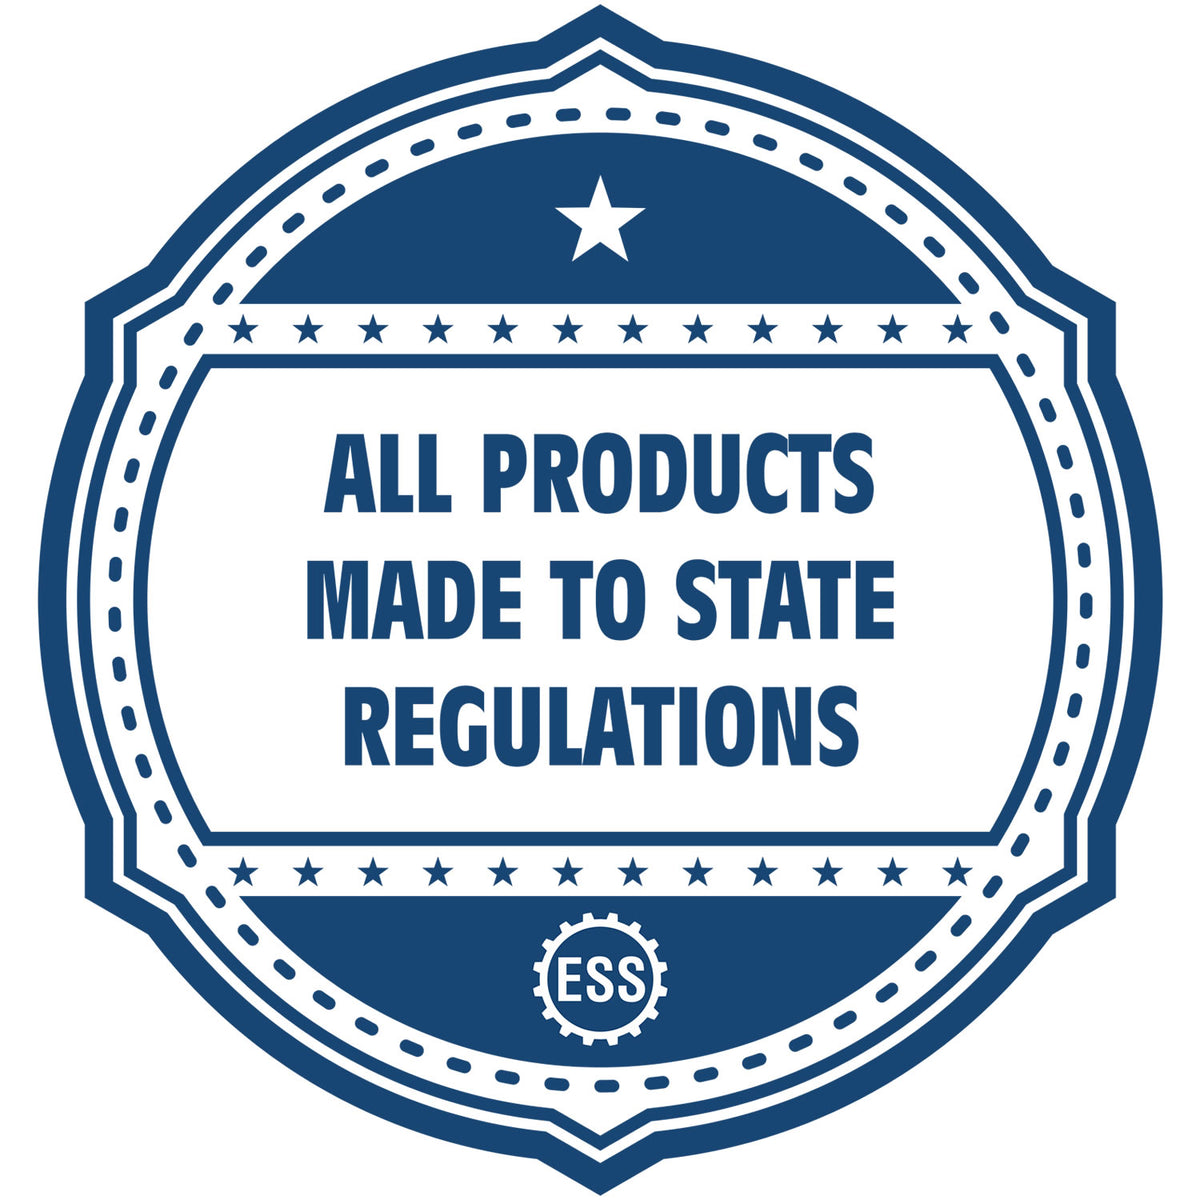 An icon or badge element for the Maine Desk Architect Embossing Seal showing that this product is made in compliance with state regulations.